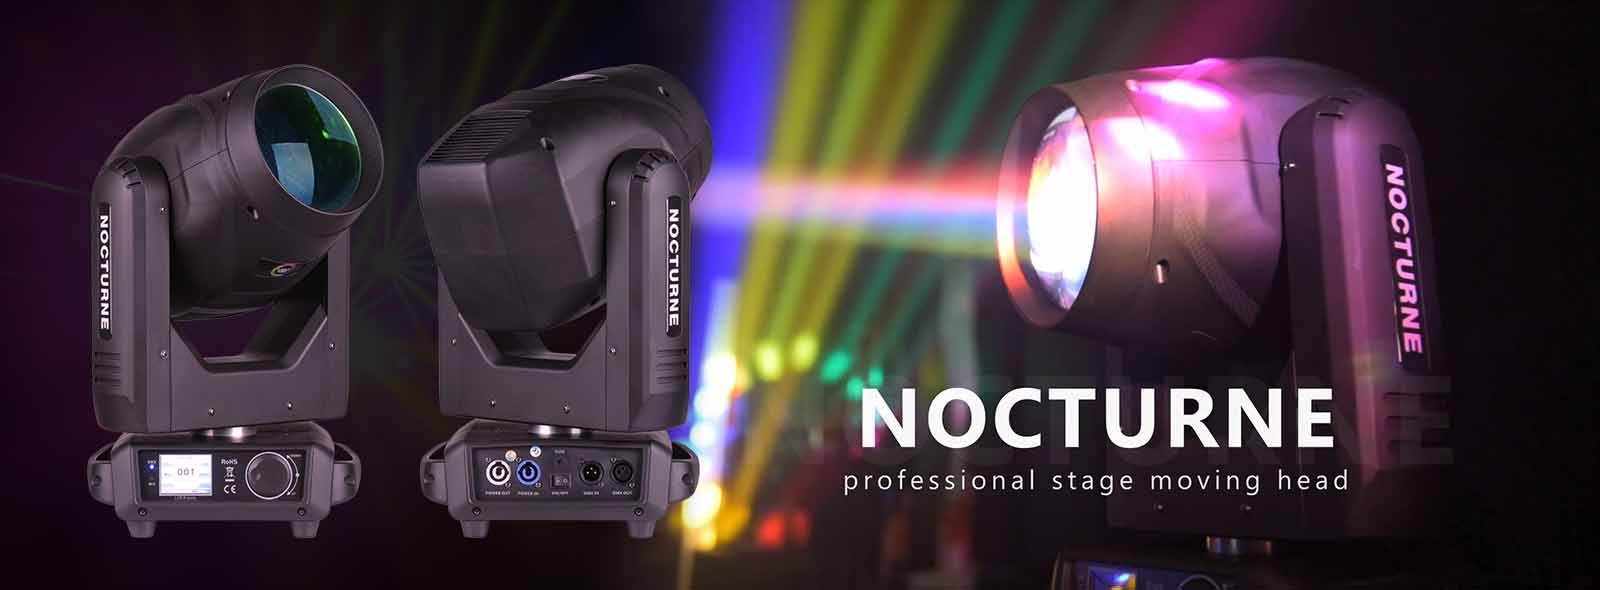 Light4Me Nocturne – professional stage moving head